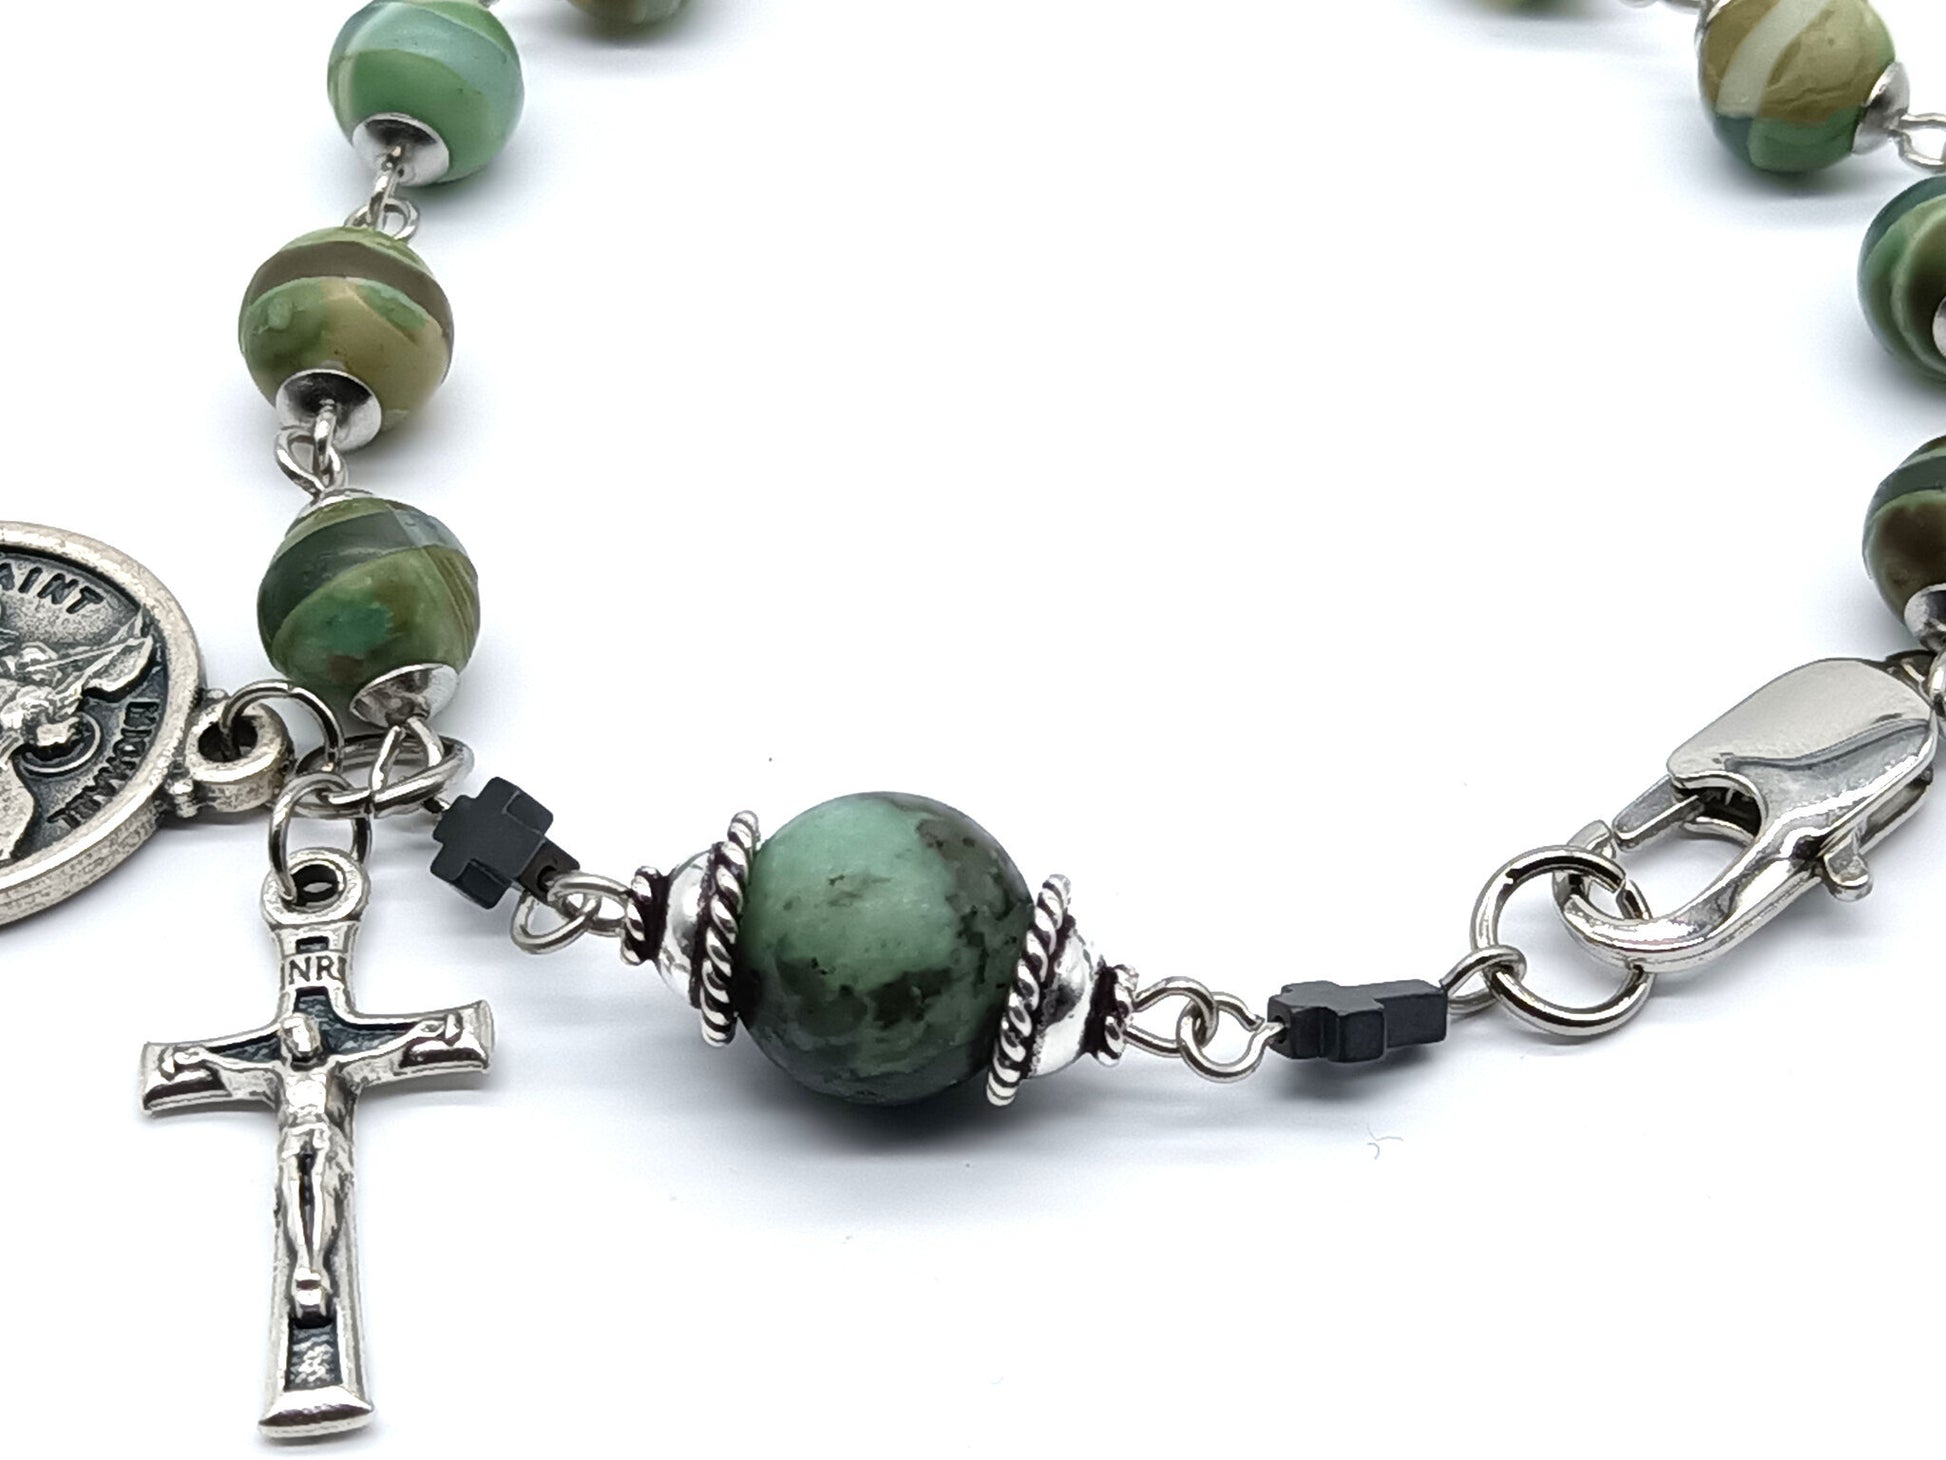 Saint Michael unique rosary beads single decade bracelet with green gemstone beads, silver crucifix, St. Michael medal and lobster clasp.